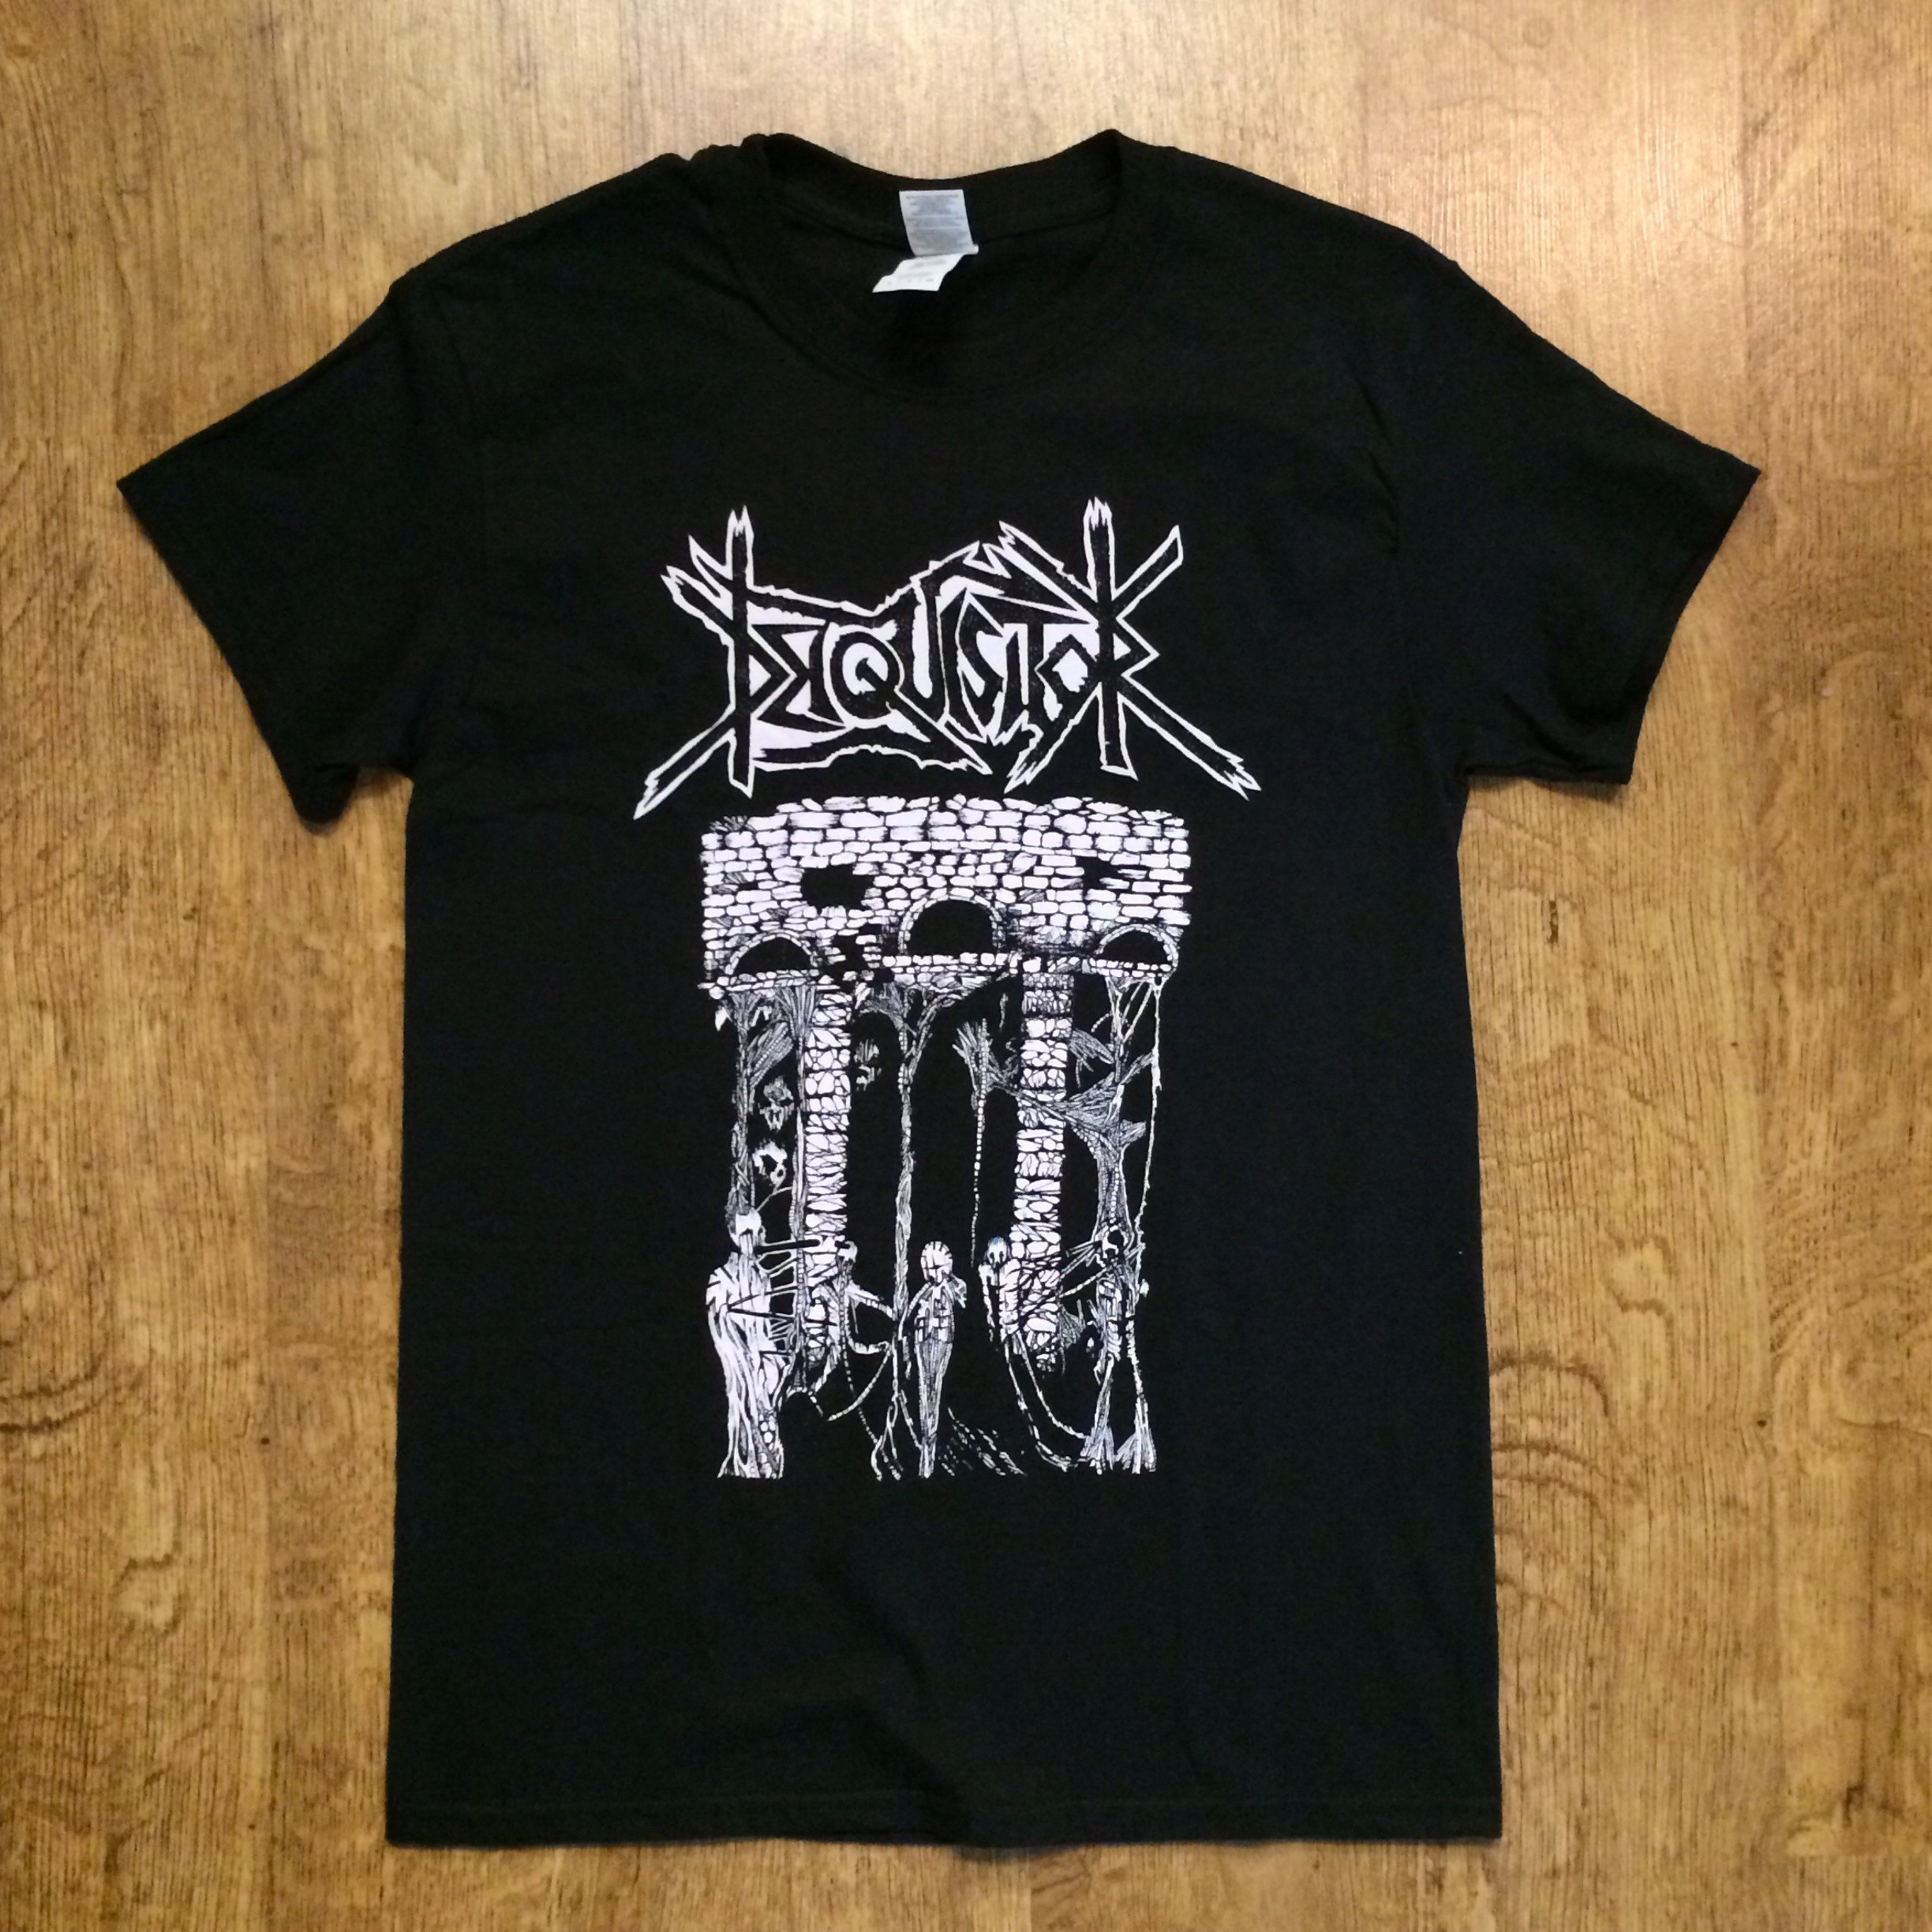 Photo of the Deiquisitor - "Ghosts" - T-shirt (Black)